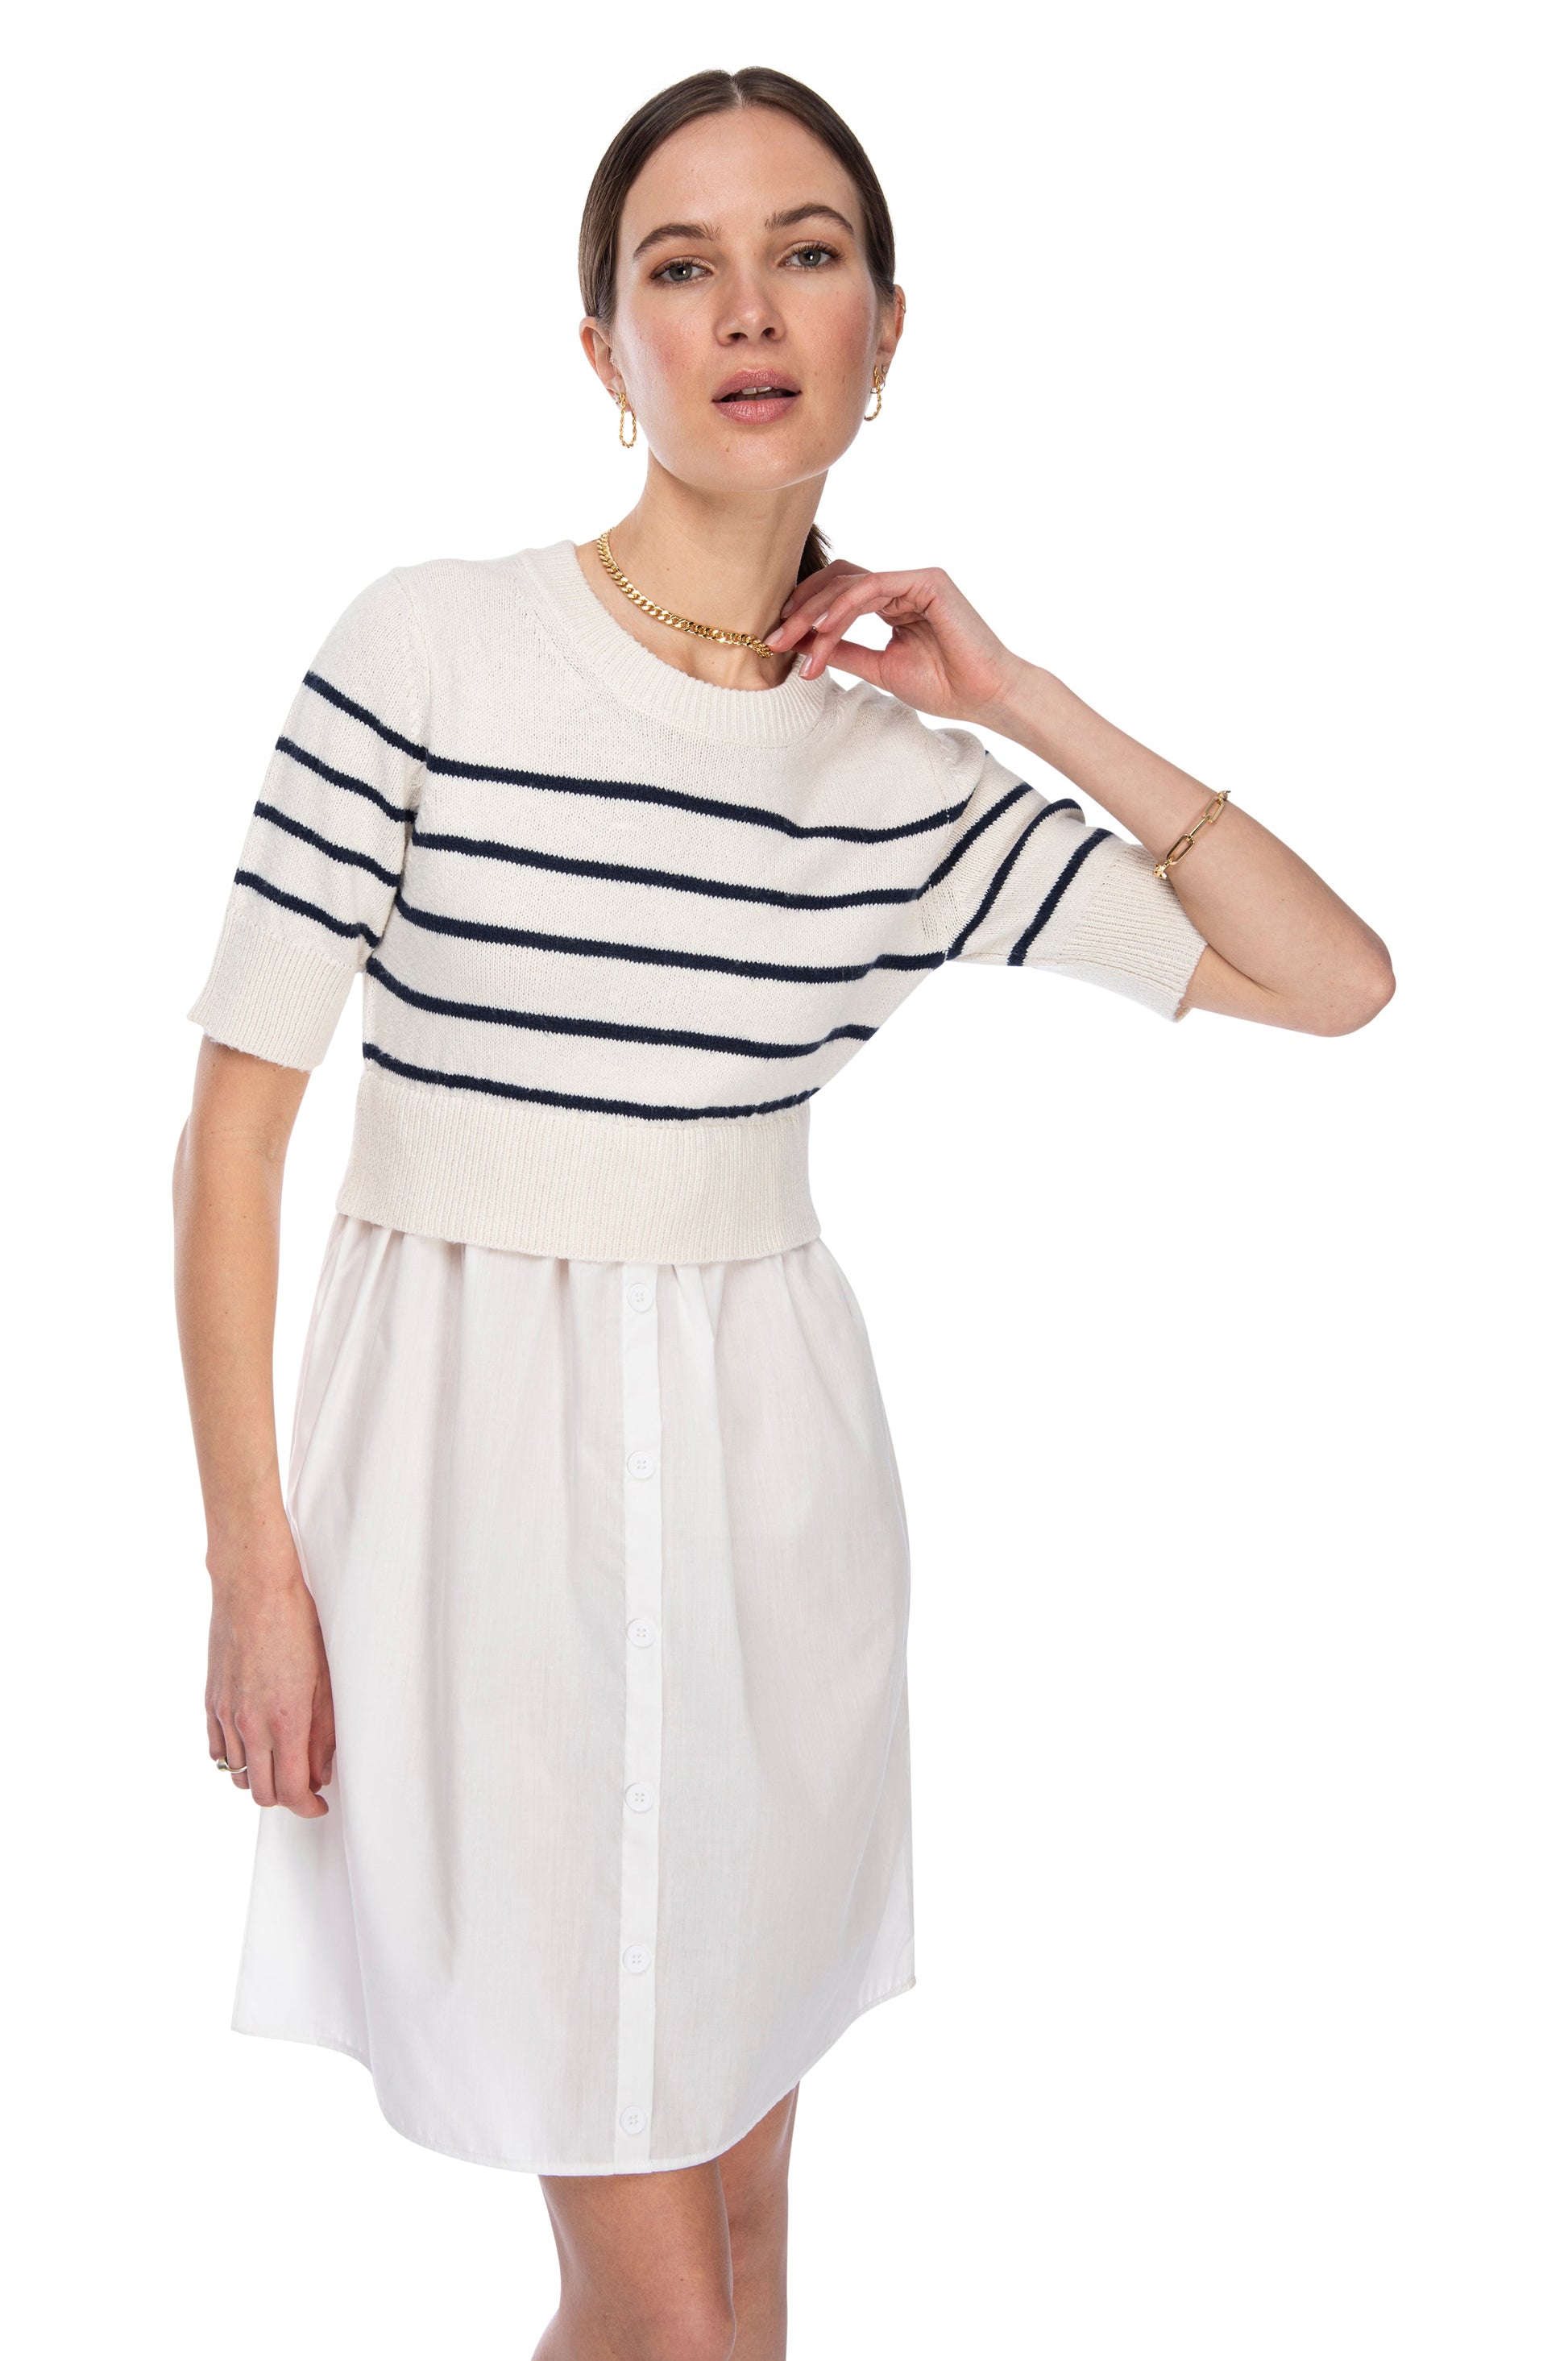 A woman posing with her hand on her neck, wearing a stylish cream poplin skirt and a short-sleeved B Collection by Bobeau mixed media dress, accessorized with a gold necklace and bracelet.